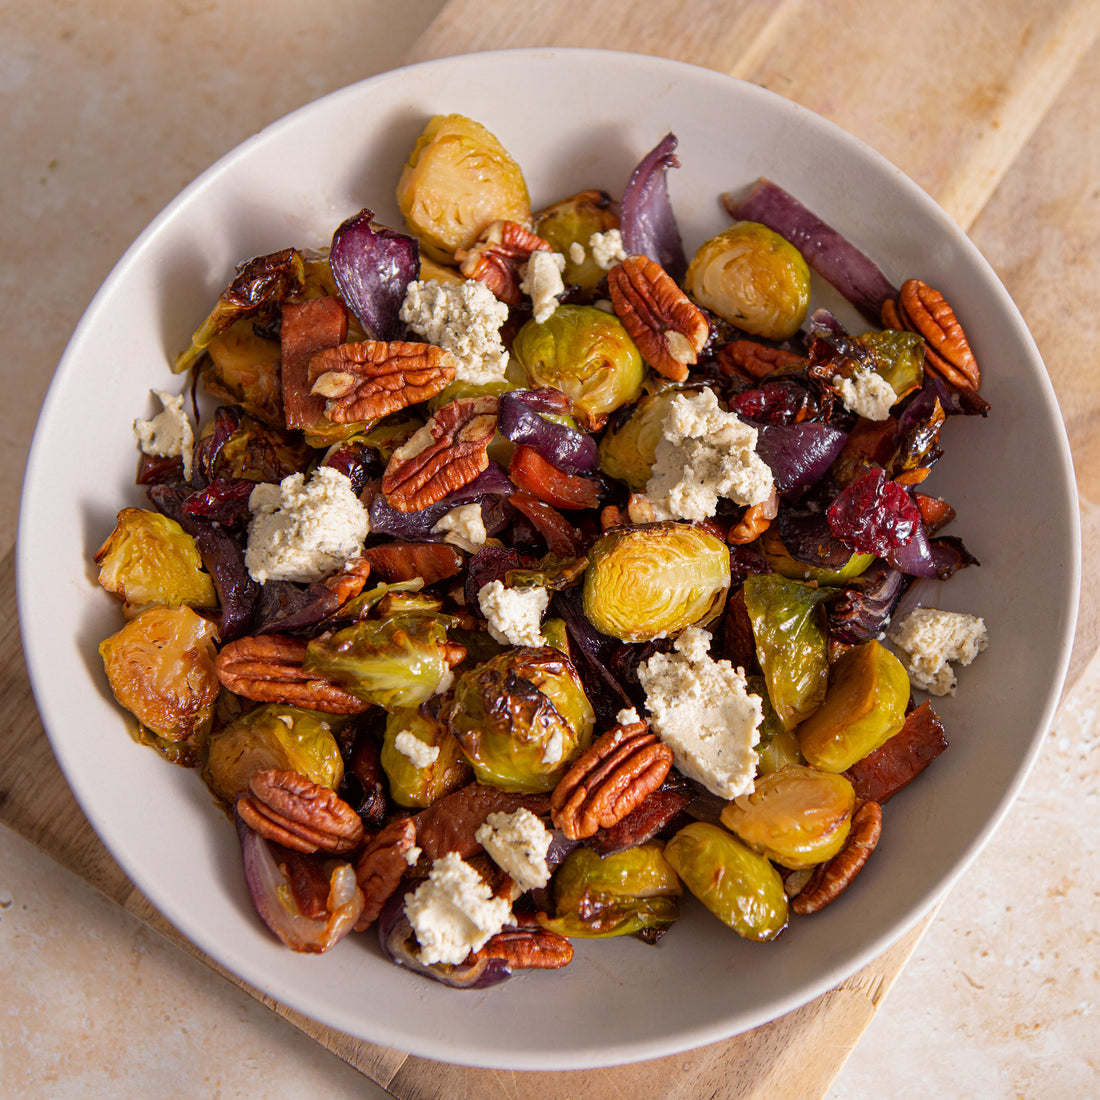 Brussel Sprouts with garlicky & herb vegan cheese